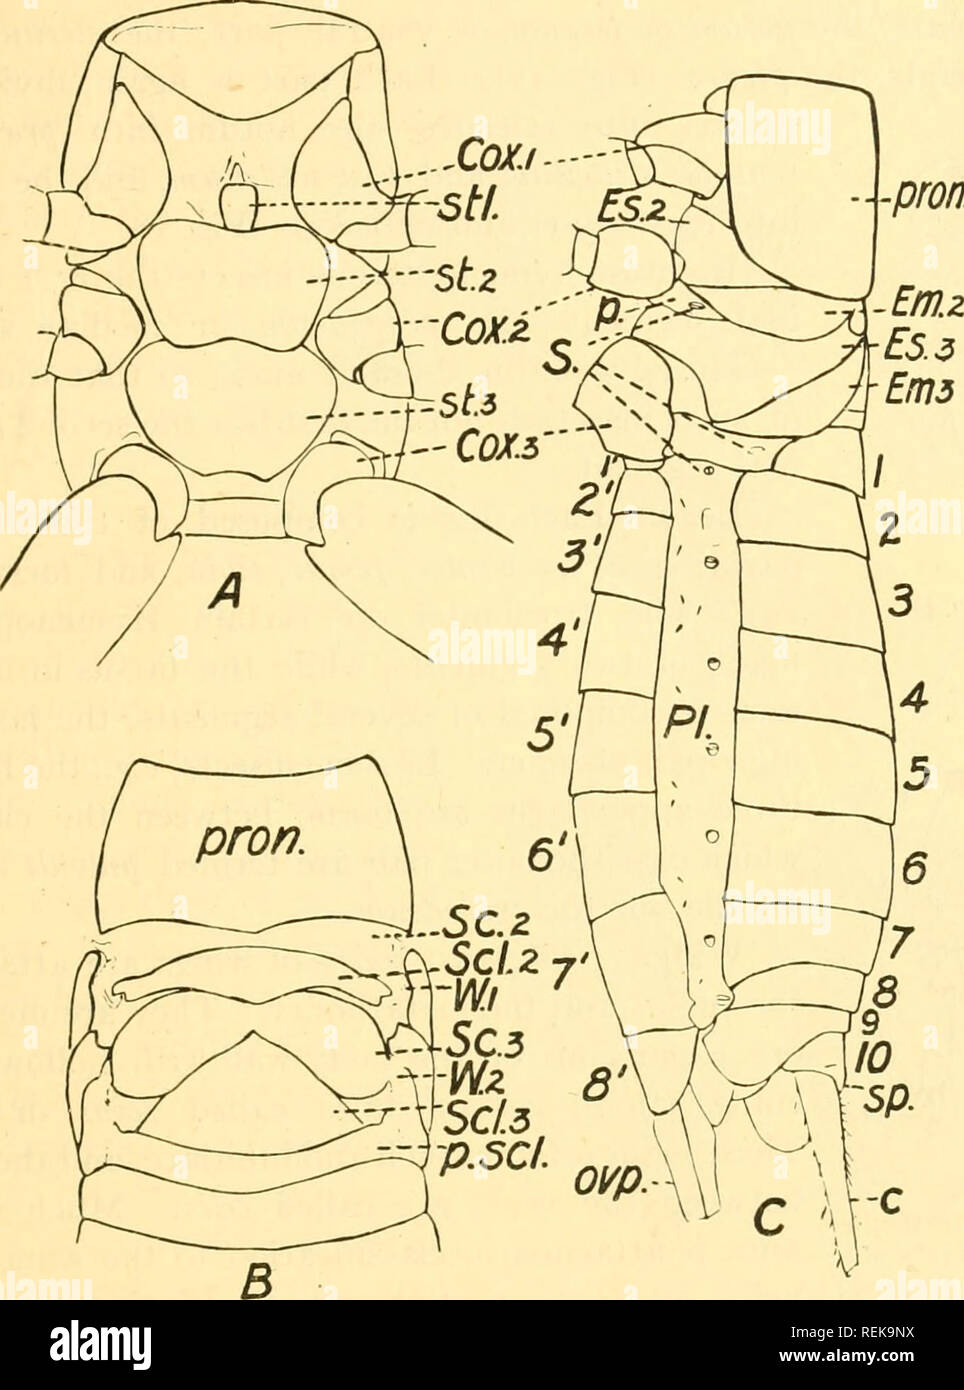 . Class book of economic entomology, with special reference to the economic insects of the northern United States and Canada. Beneficial insects; Insect pests; Insects; Insects. STRUCTURE, GROWTH AND ECONOMICS OF INSECTS 13 Special Organs of Sense.—The halteres of Diptera contain sensory organs, but their function has not yet been definitely ascertained. pron.. Fig. 18.—Gryllus pennsylvanicus. A, Ventral view of thorax; B, dorsal view of thorax, distal portion of pronotum removed; C, lateral view of thorax and abdomen. Cox., C0X.2, Cox-z, First, second and third coxae; Stl., prosternellum; 5/. Stock Photo